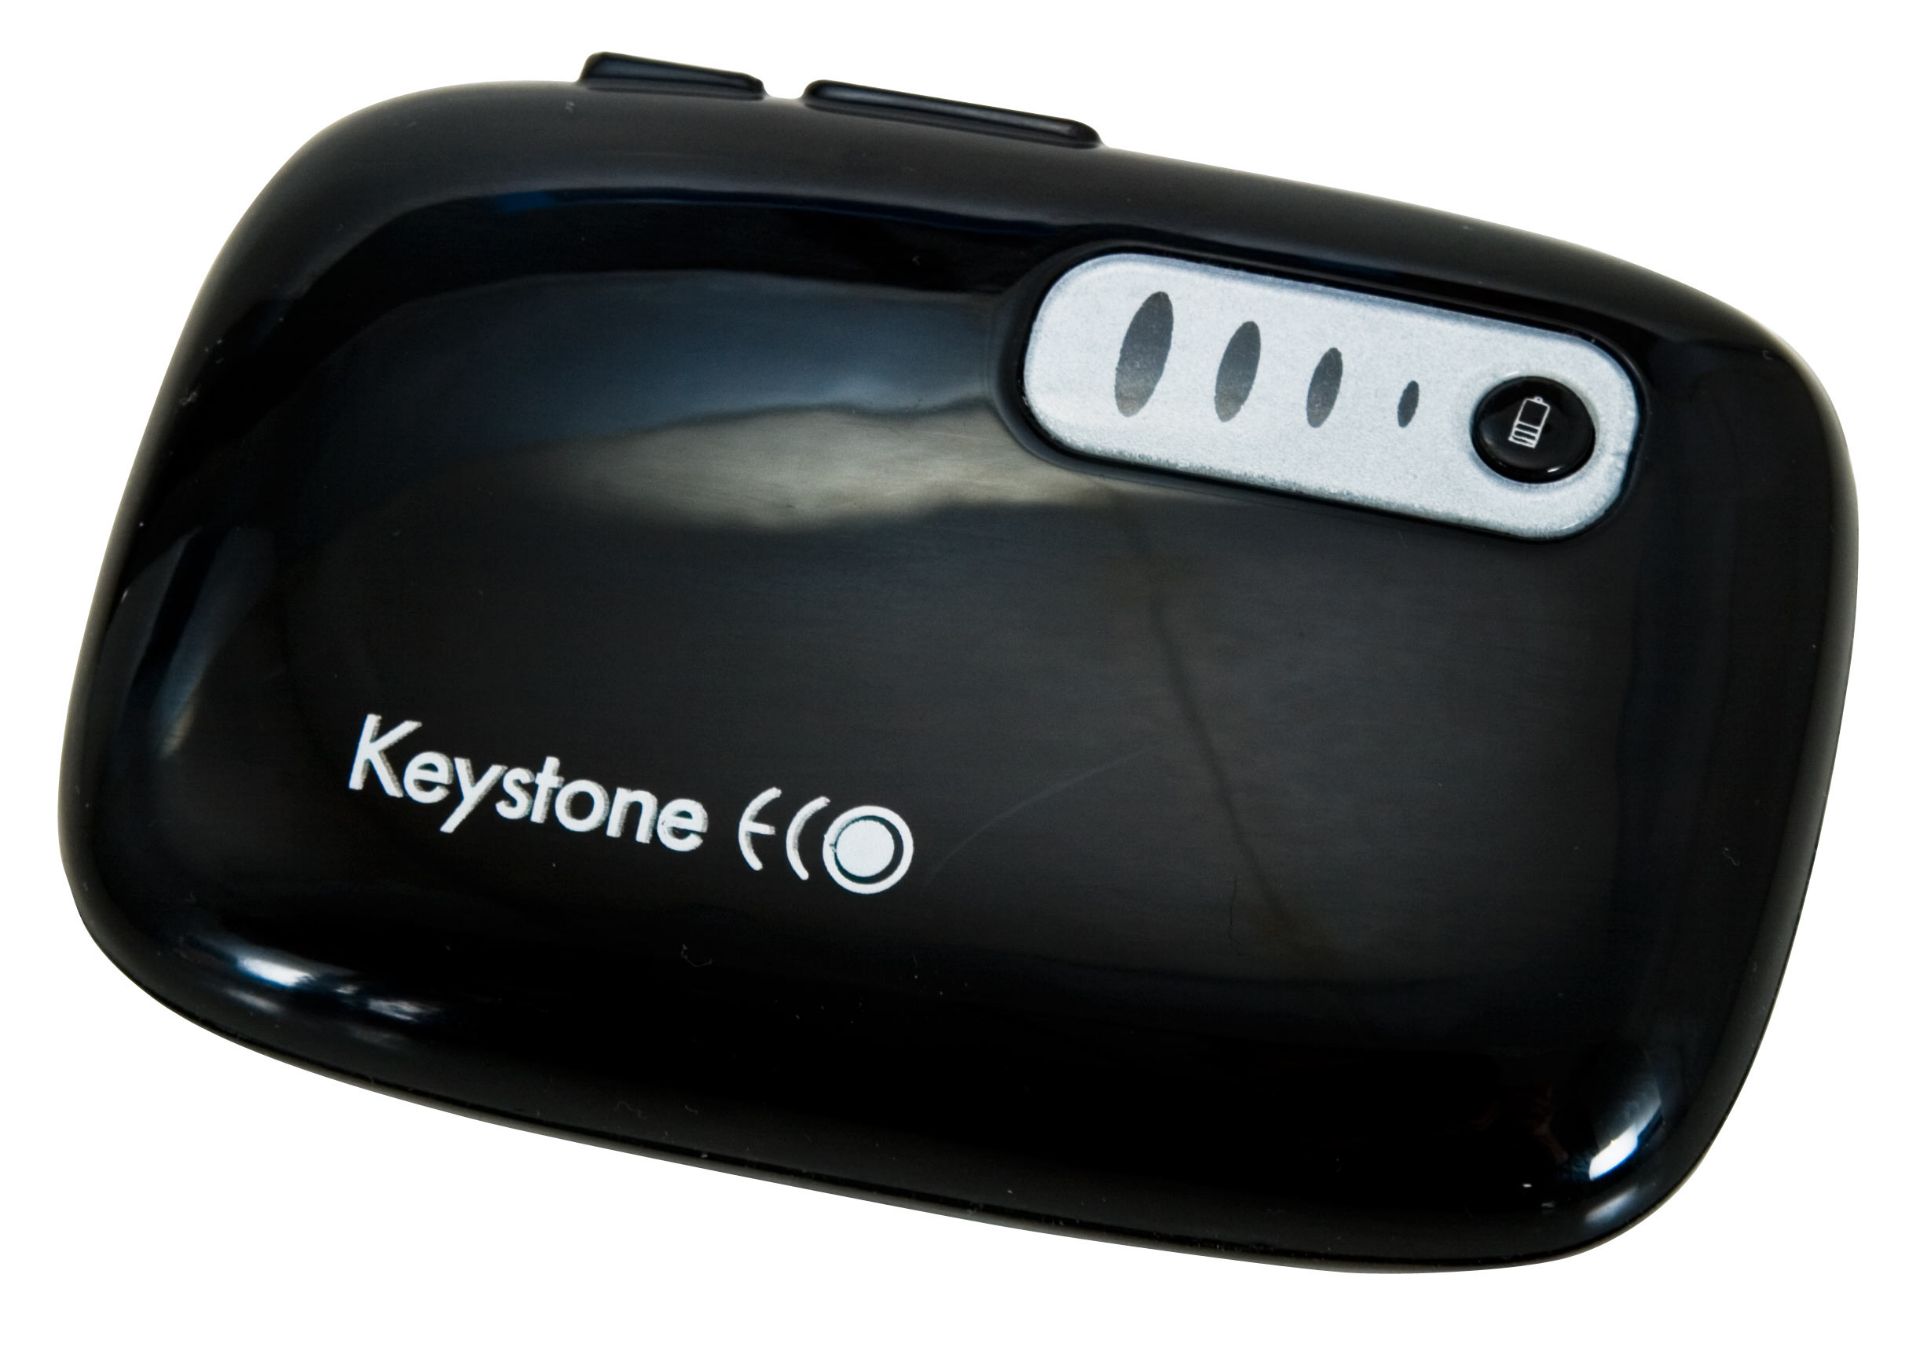 22 Units - Keystone Eco PP2000 Charger & Power Pack - Image 2 of 2